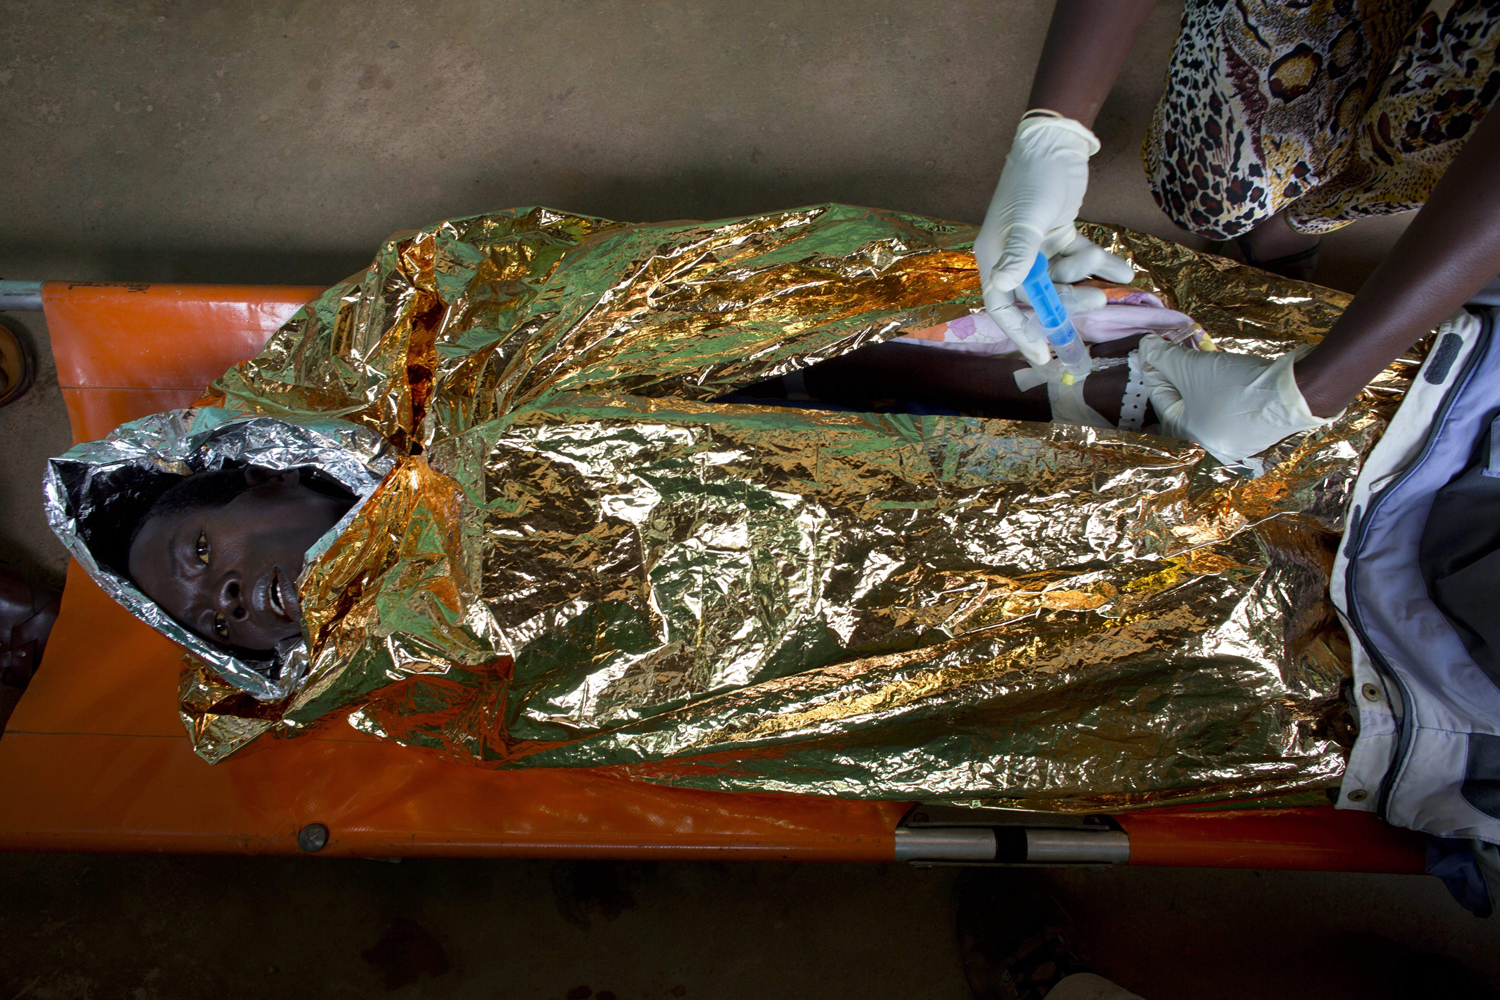 June 27, 2013. Medical personnel wrap aluminum foil around an HIV patient to keep warm in Batangafo, Central African Republic.